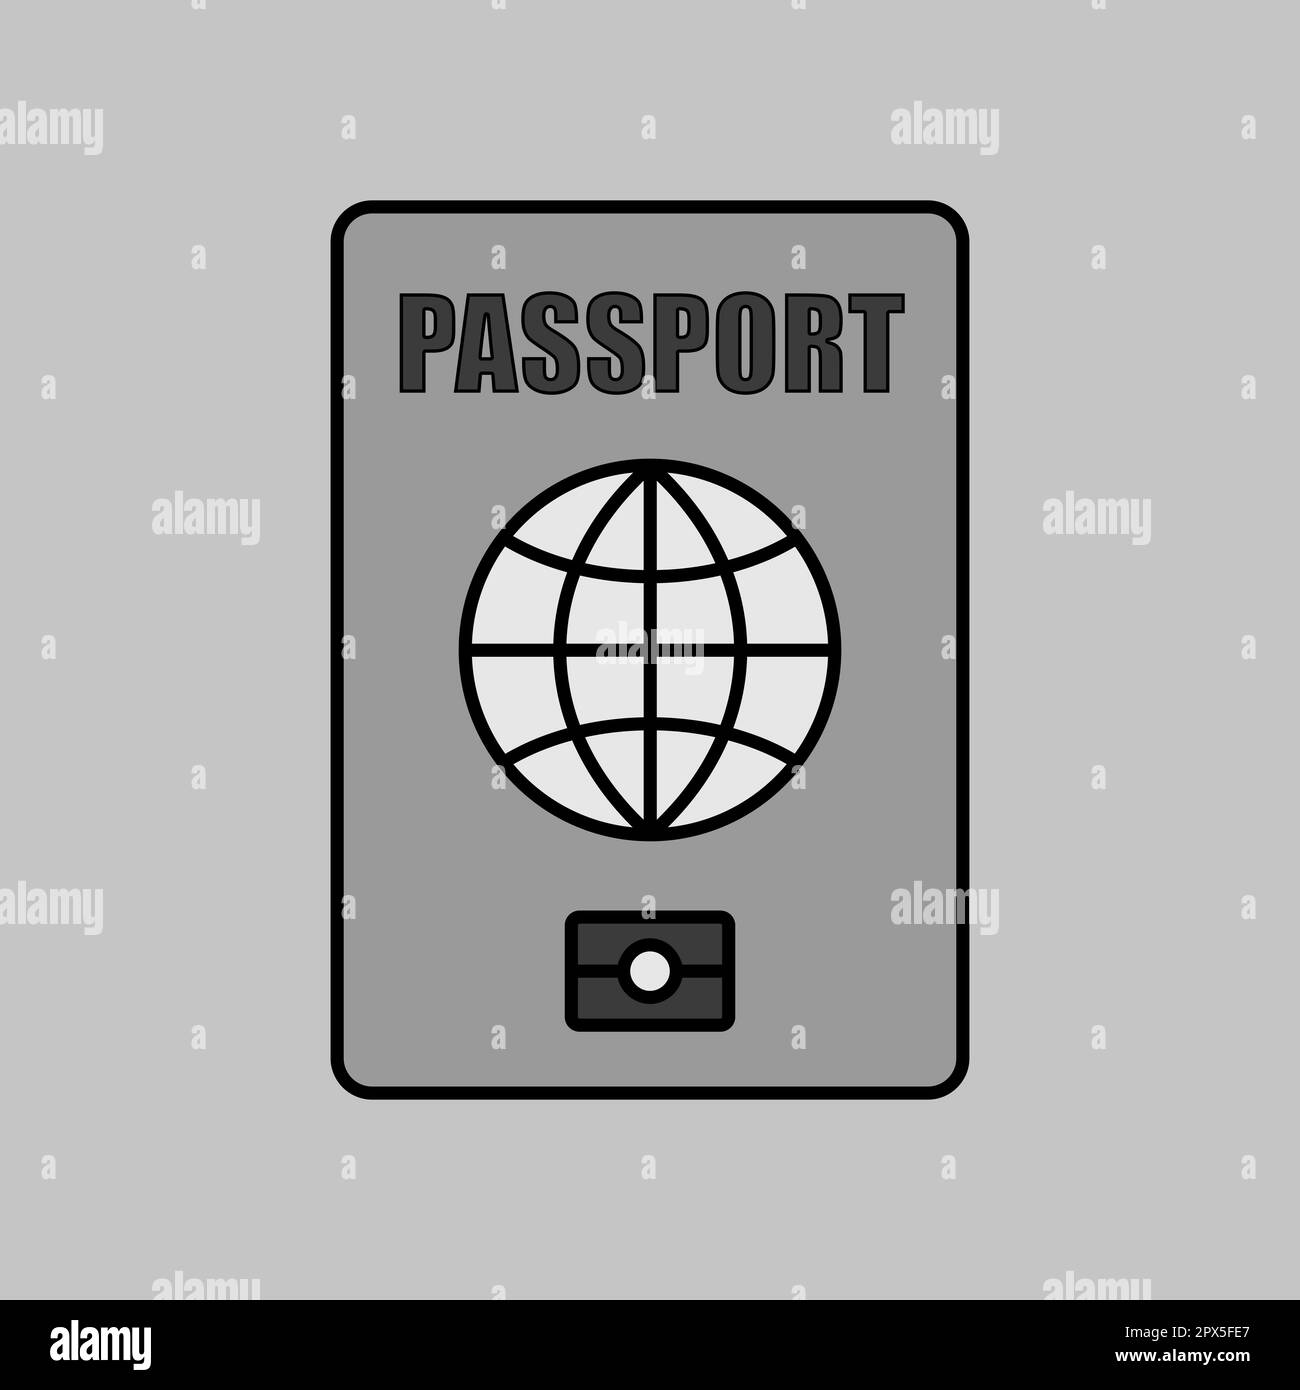 Passport vector isolated grayscale icon, identification symbol. Graph symbol for travel and tourism web site and apps design, logo, app, UI Stock Photo